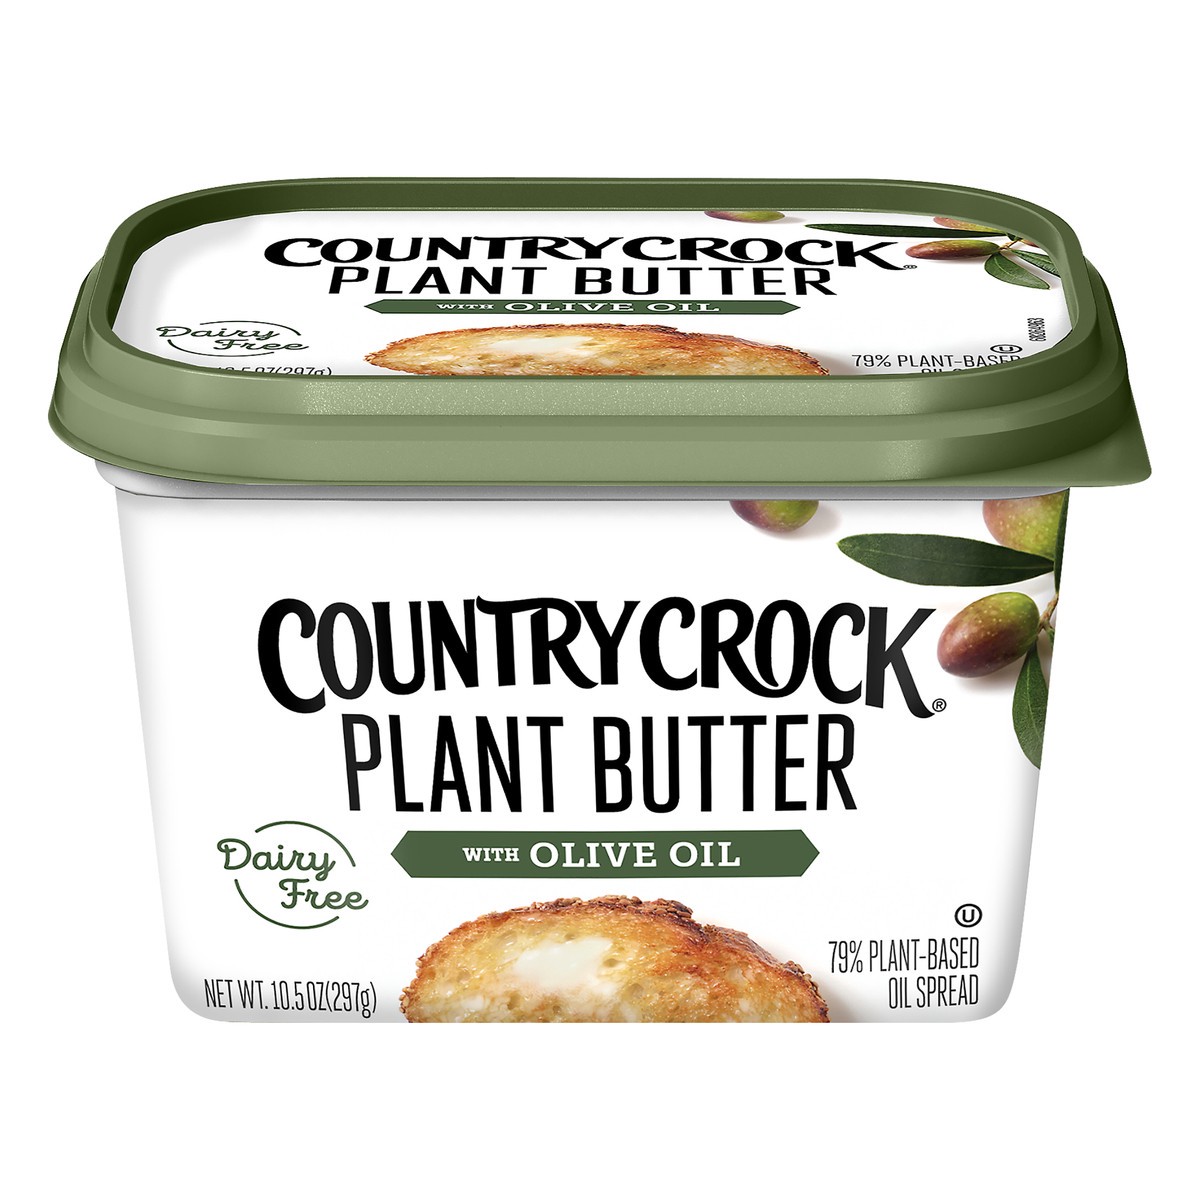 slide 1 of 7, Country Crock Dairy Free Plant Butter with Olive Oil 10.5 oz, 10.5 oz